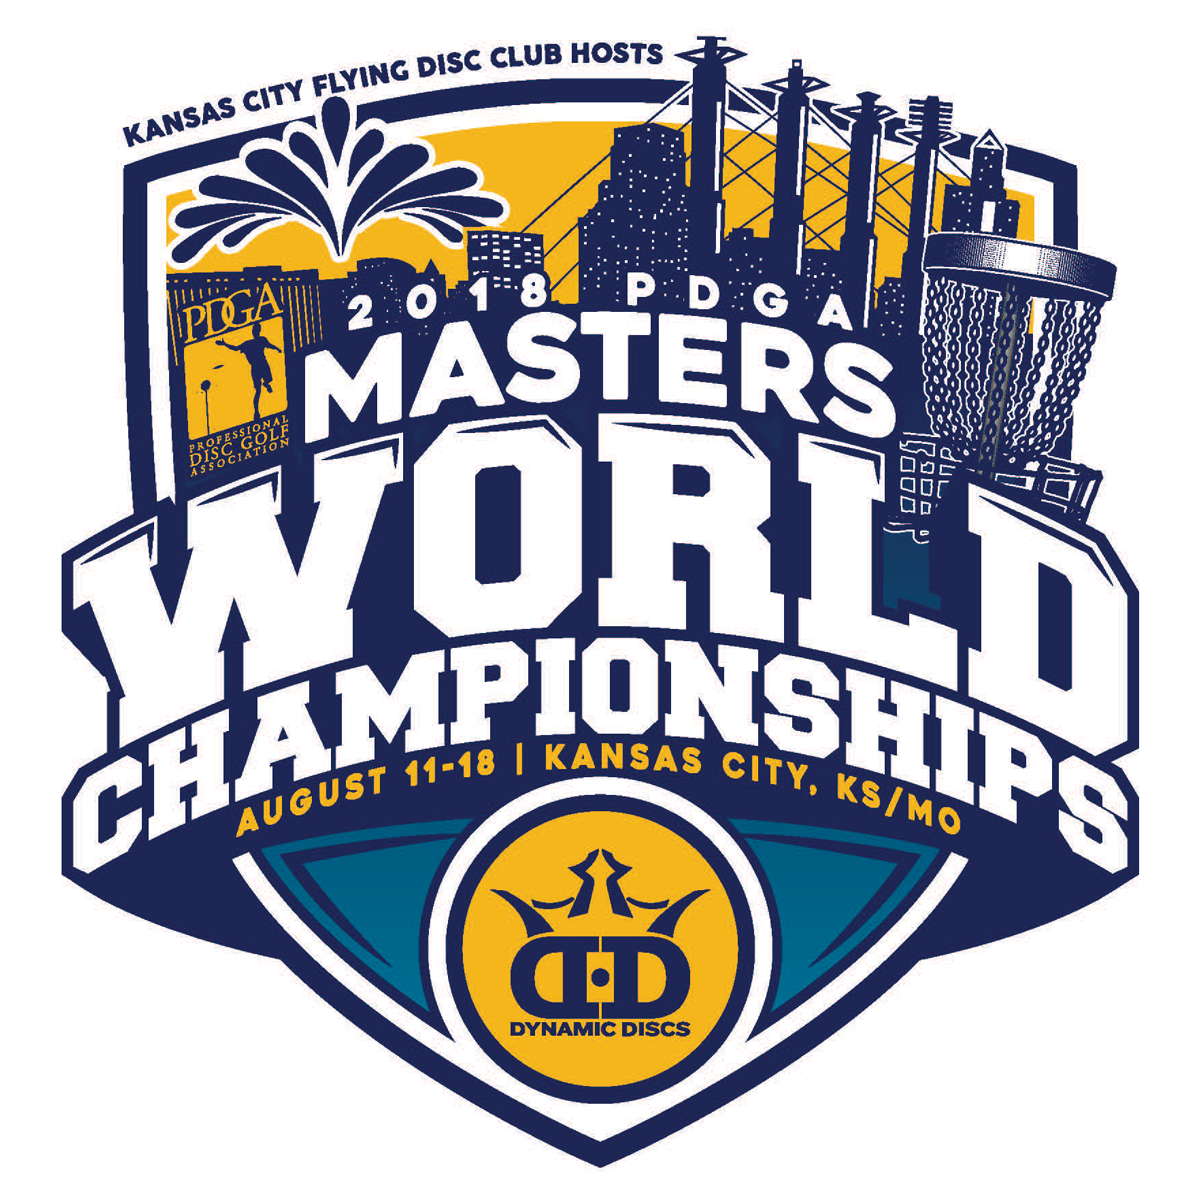 2018-masters-worlds-logo-color-1200x1200.png